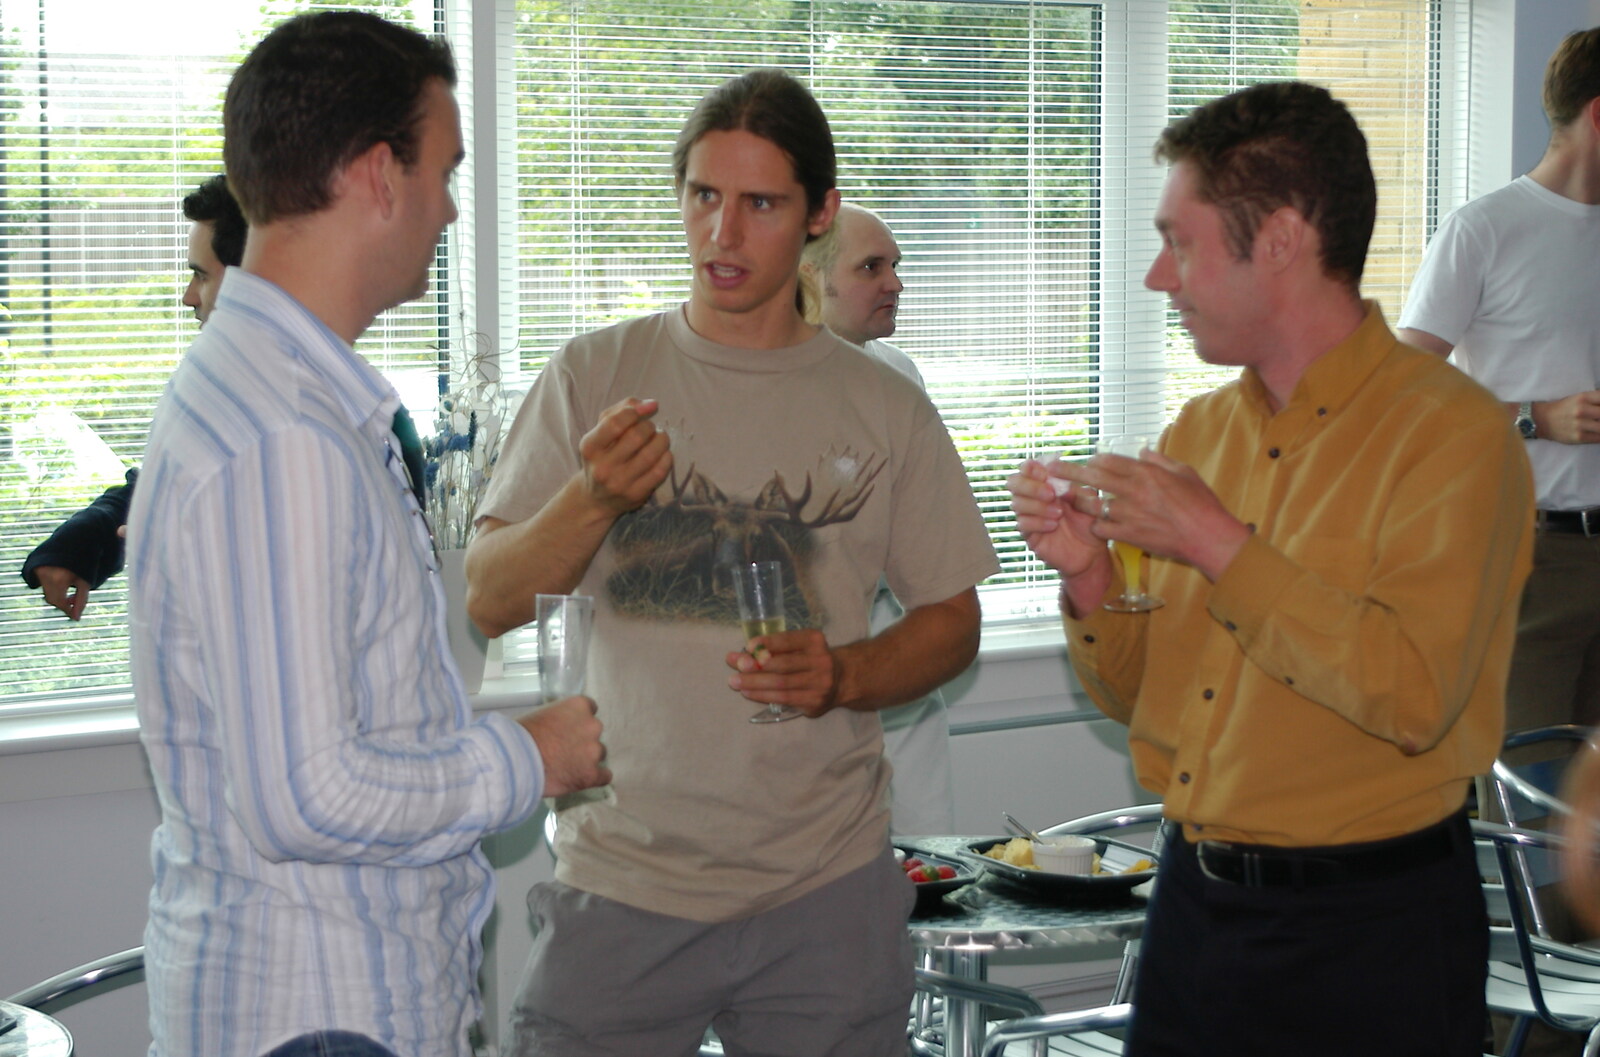 James chats with Liam and Nick from Steve Ives' Leaving Lunch, Science Park, Cambridge - 11th July 2005